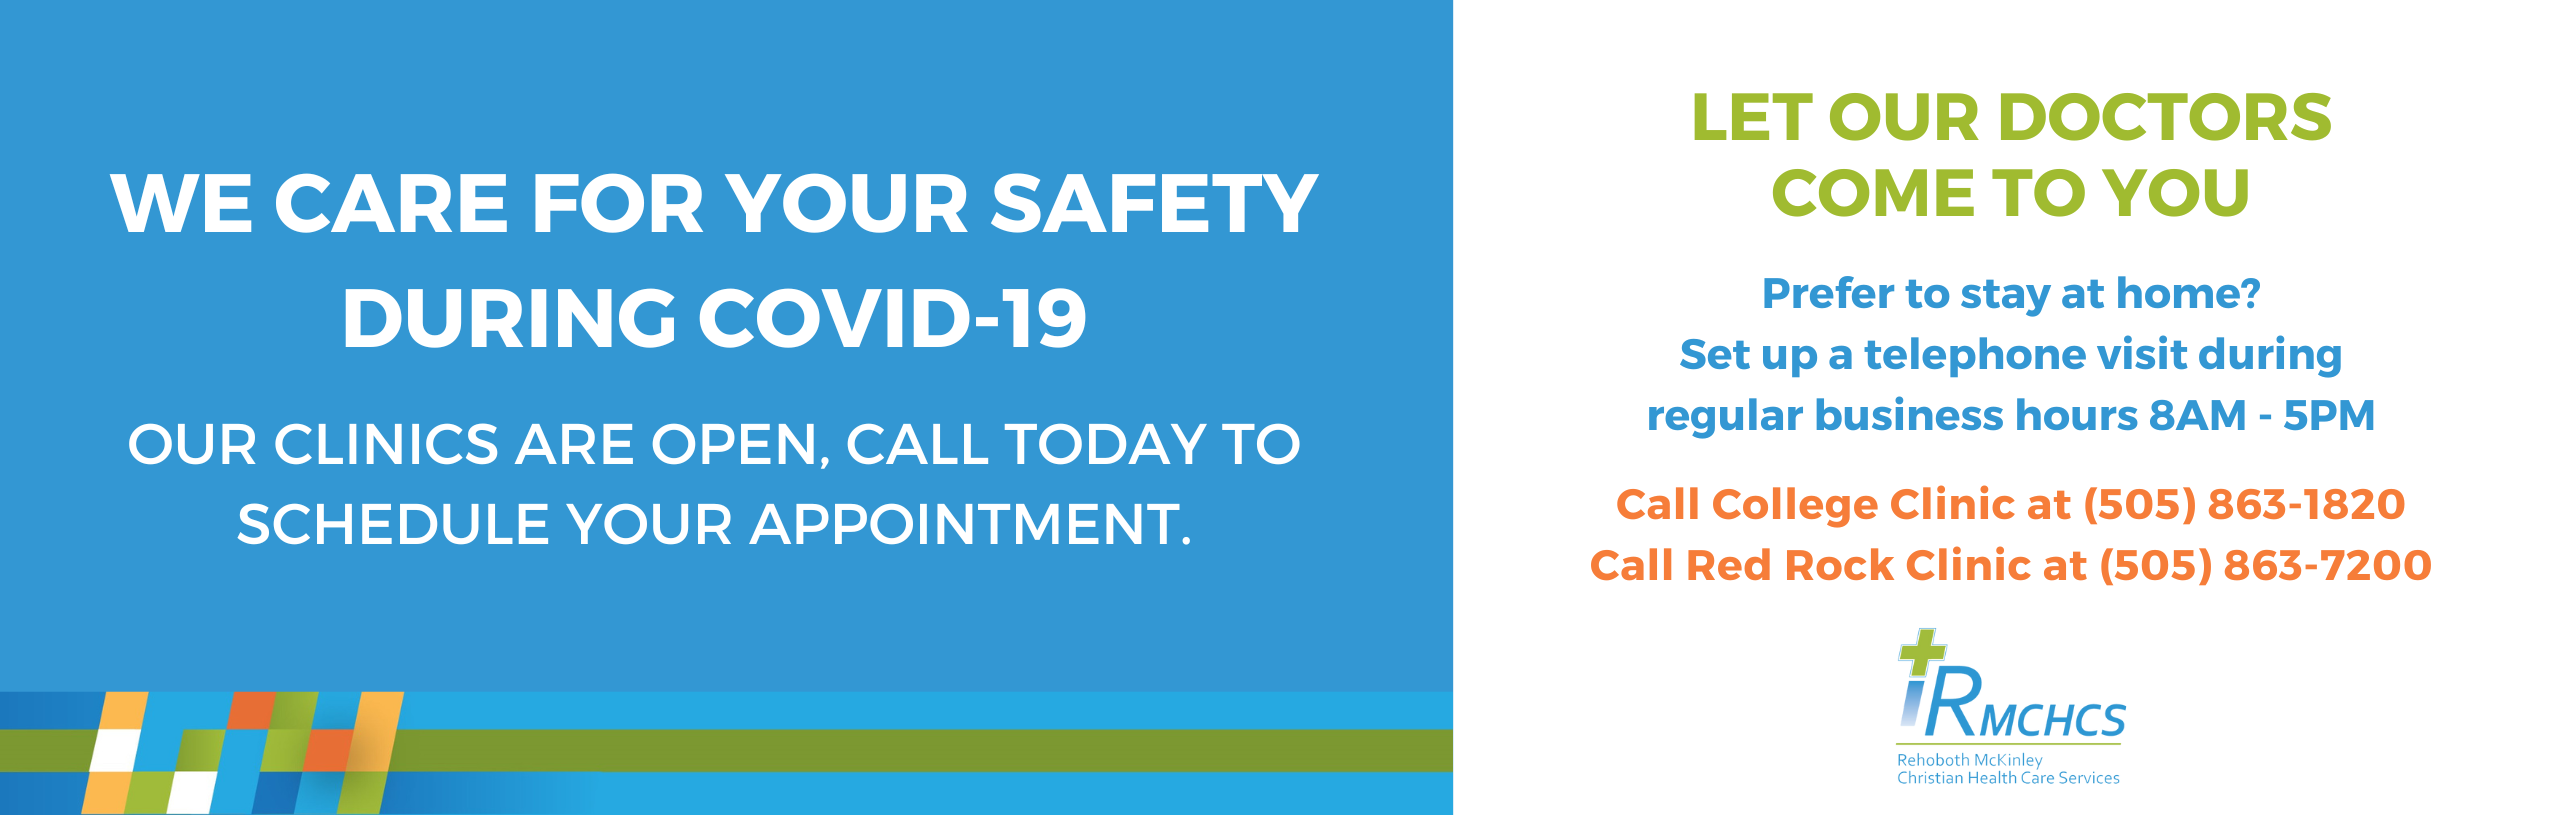 WE CARE FOR YOUR SAFETY DURING COVID-19
OUR CLINICS ARE OPEN, CALL TODAY TO SCHEDULE YOUR APPOINTMENT.

LET OUR DOCTOR COME TO YOU
PREFER TO STAY AT HOME?
SET UP A TELEPHONE VISIT
REGULAR BUSINESS HOURS 8AM-5PM

CALL COLLEGE CLINIC AT (505) 863-1820
CALL RED ROCK CLINIC AT (505)863-7200